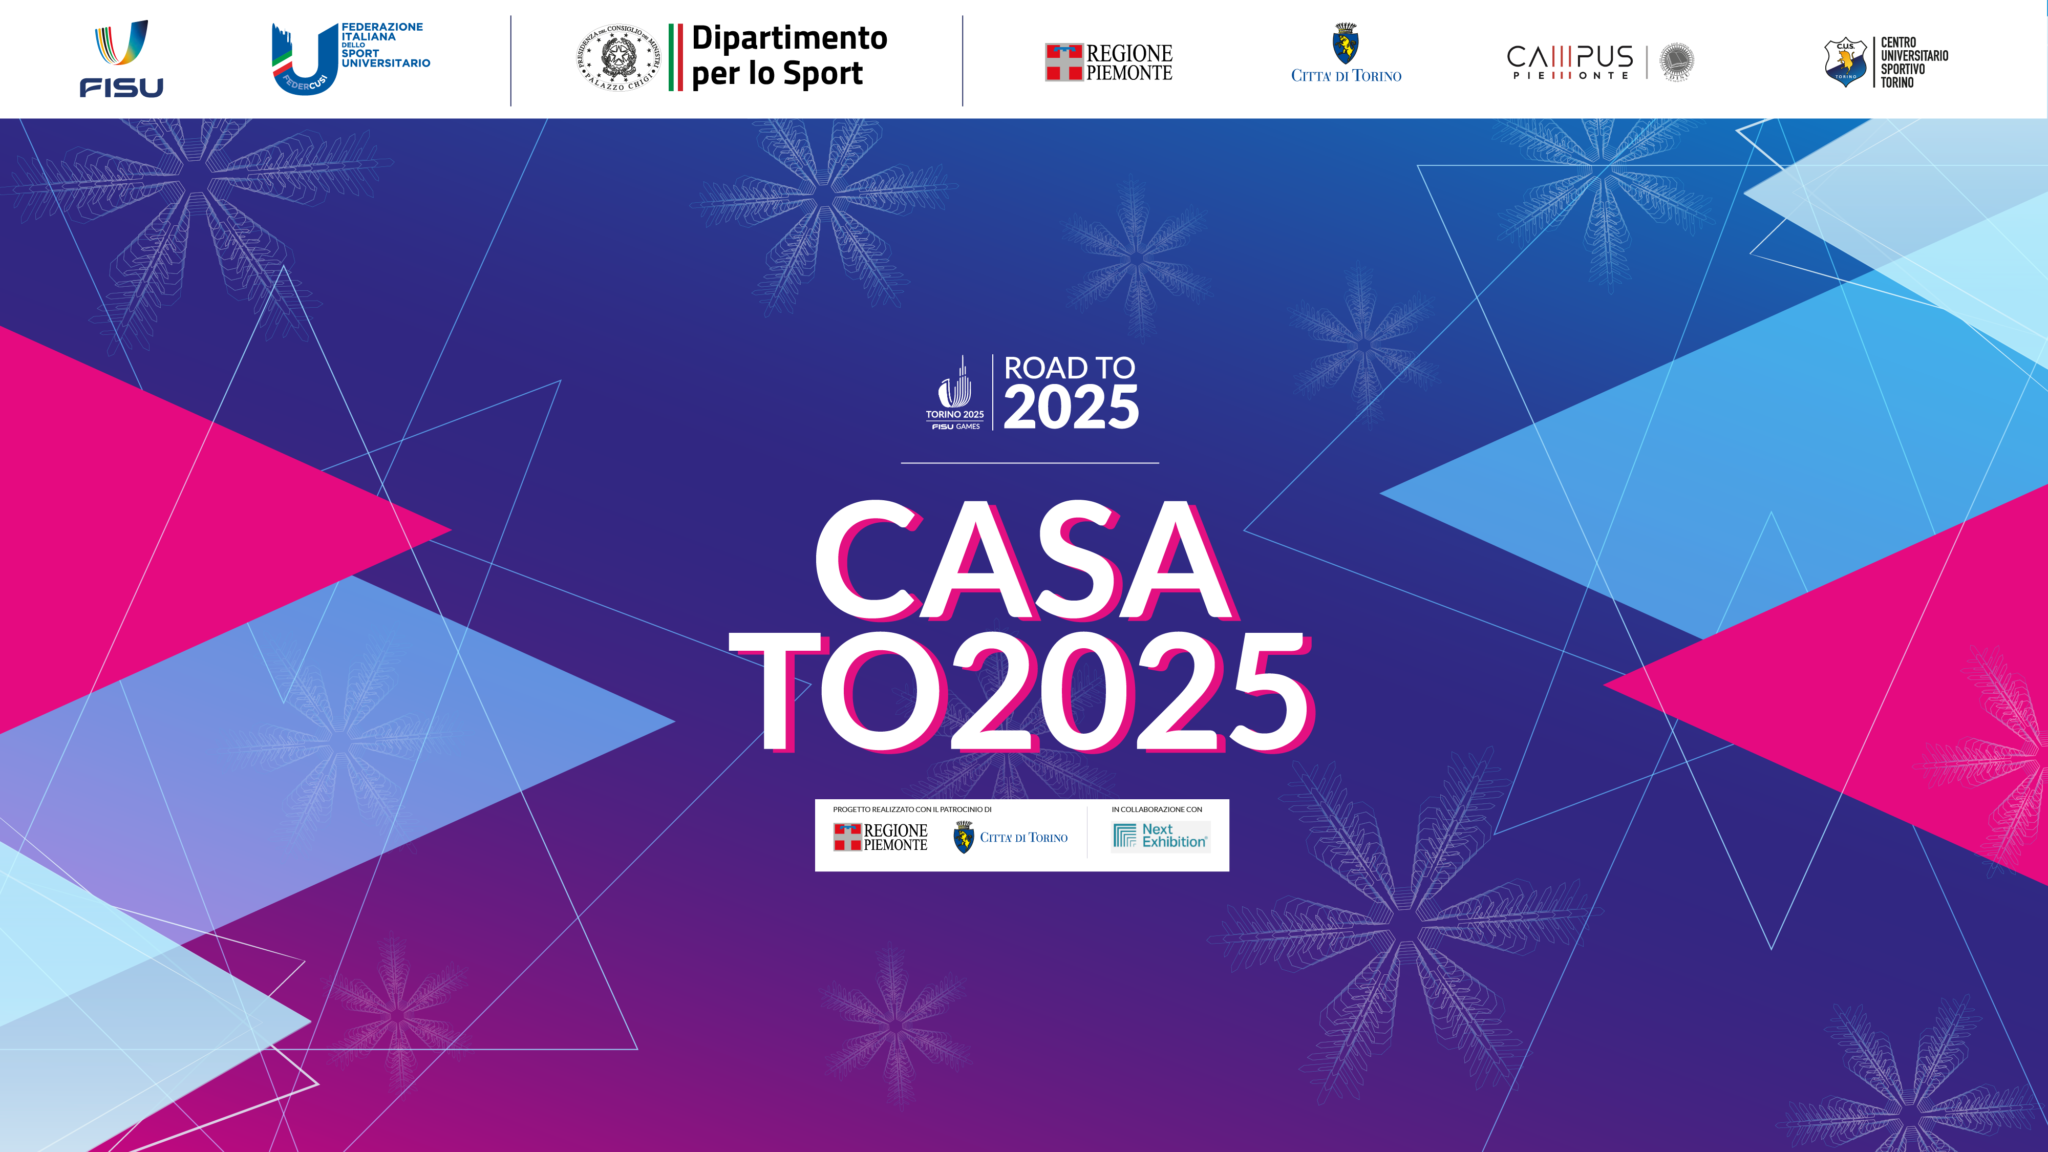 The activities at the Palavela come under the Casa TO2025 initiative which seeks to increase public participation in sport ©Turin 2025